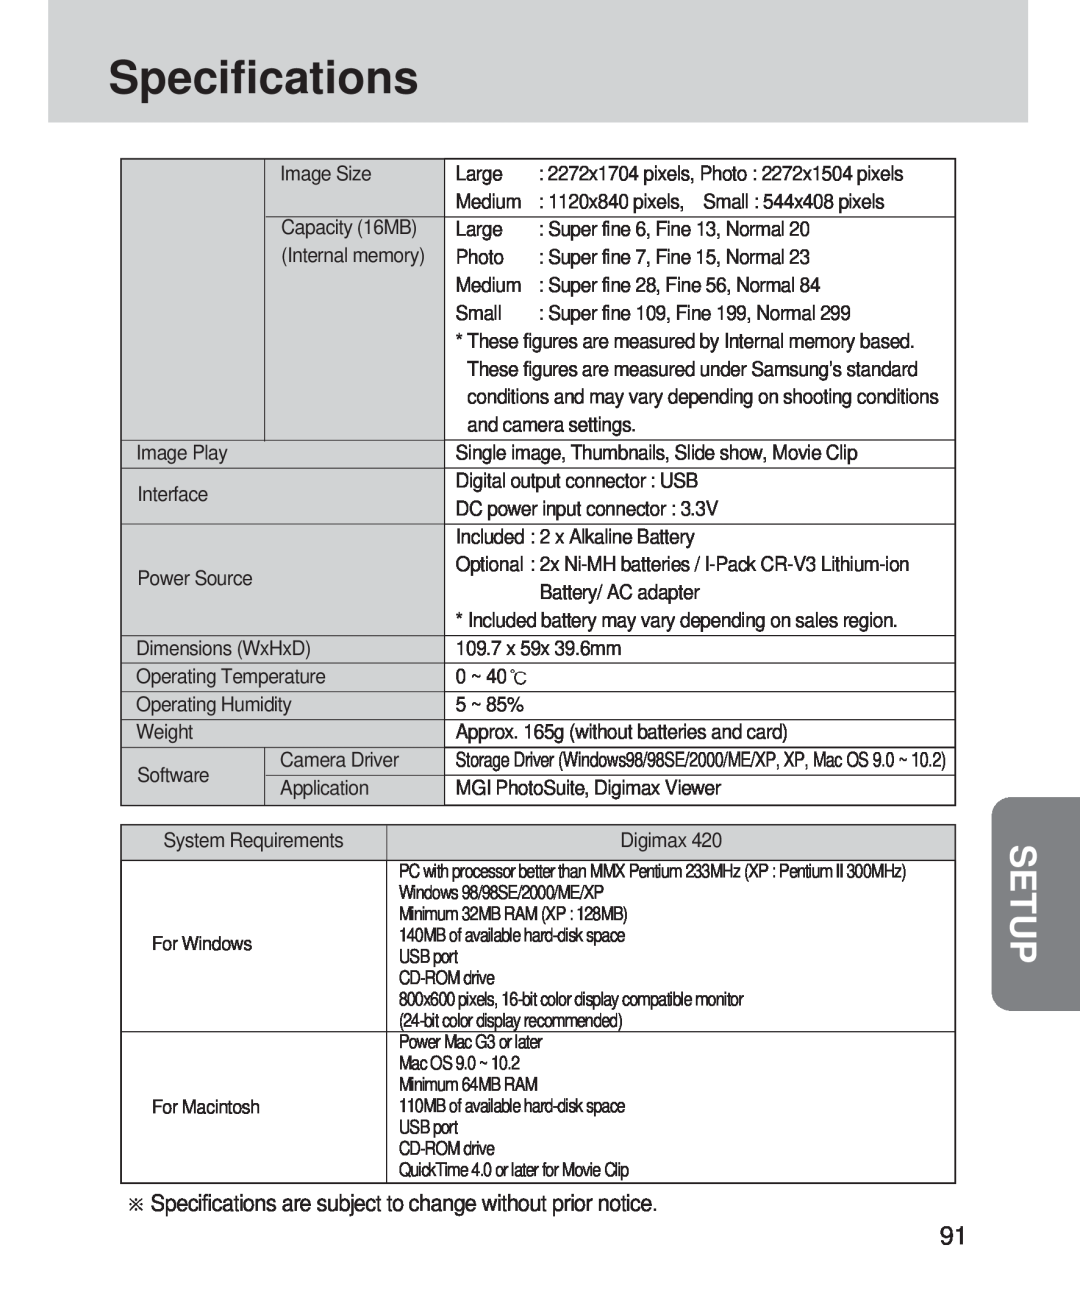 Samsung 420 manual Setup, Specifications are subject to change without prior notice 